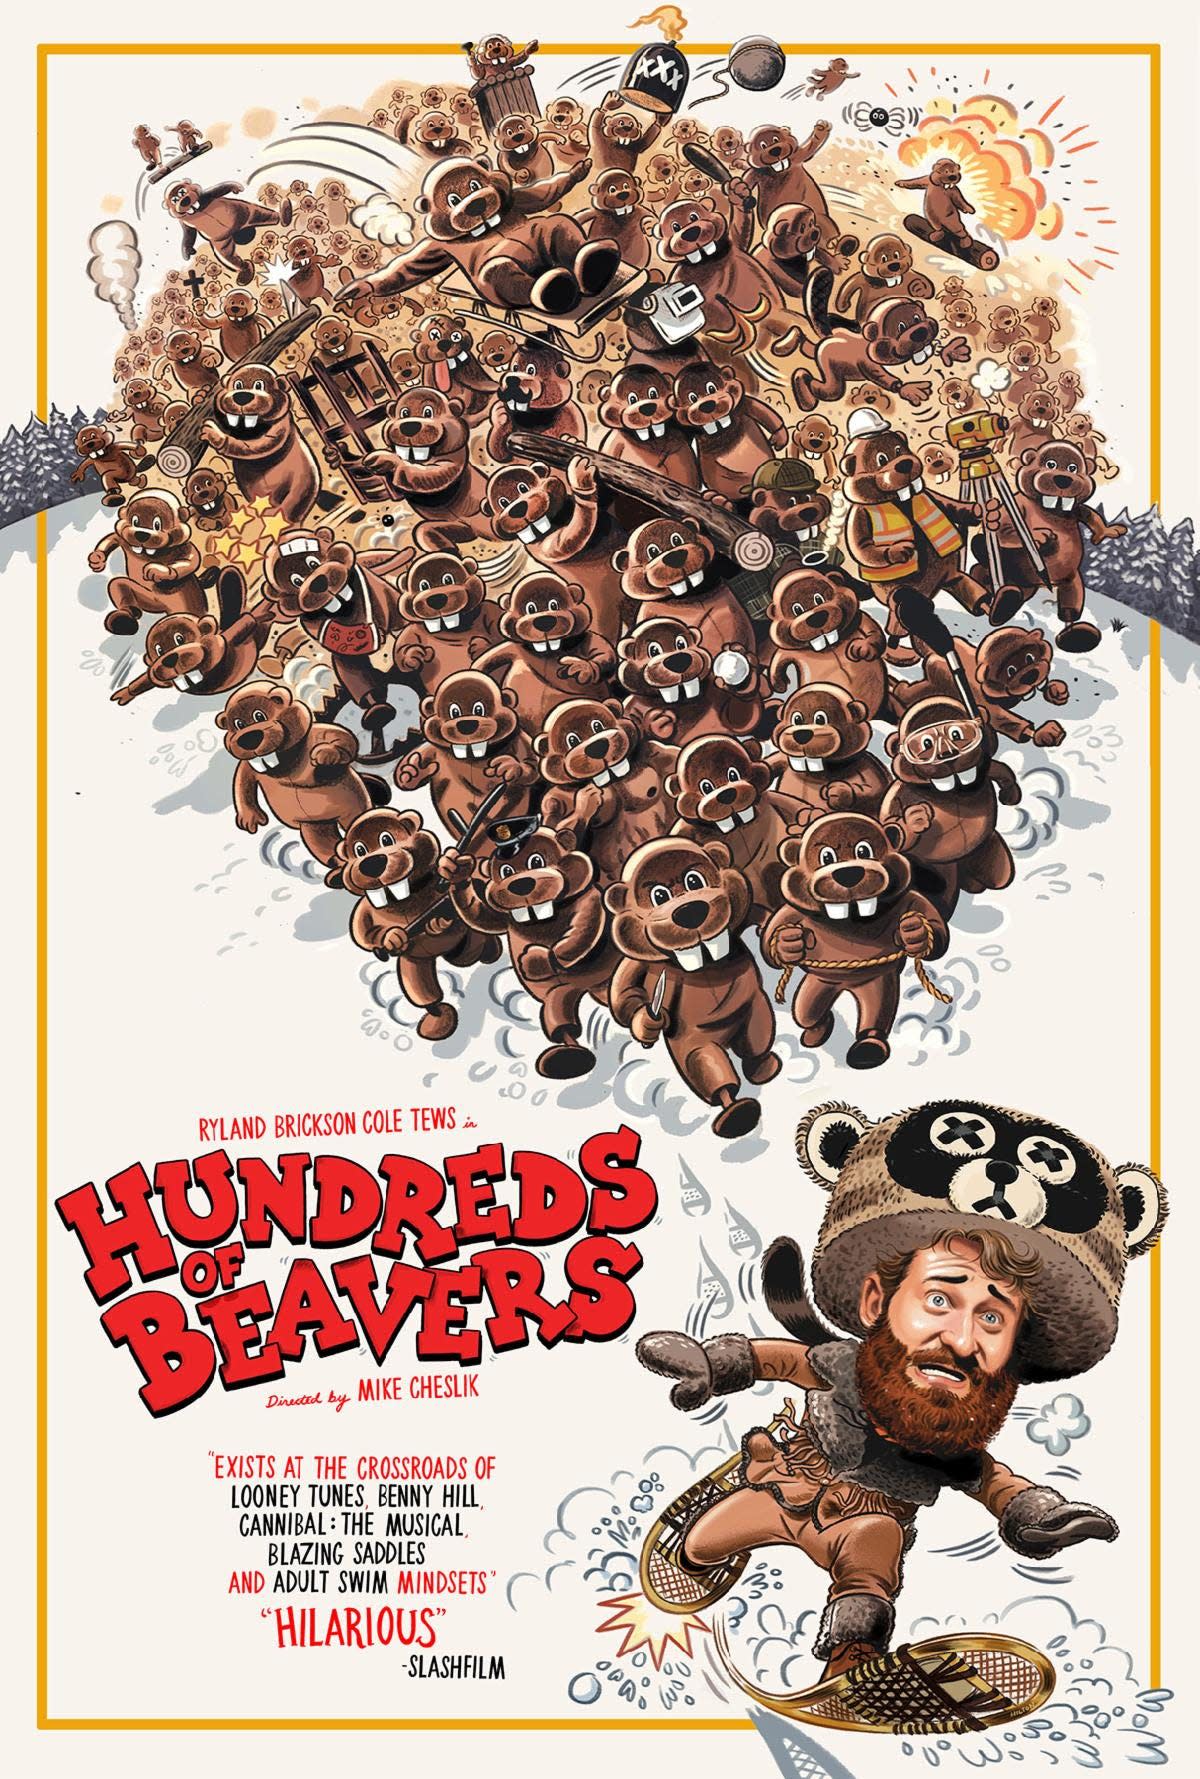 "Hundreds of Beavers" arrives on Prime Video and Apple TV this week.